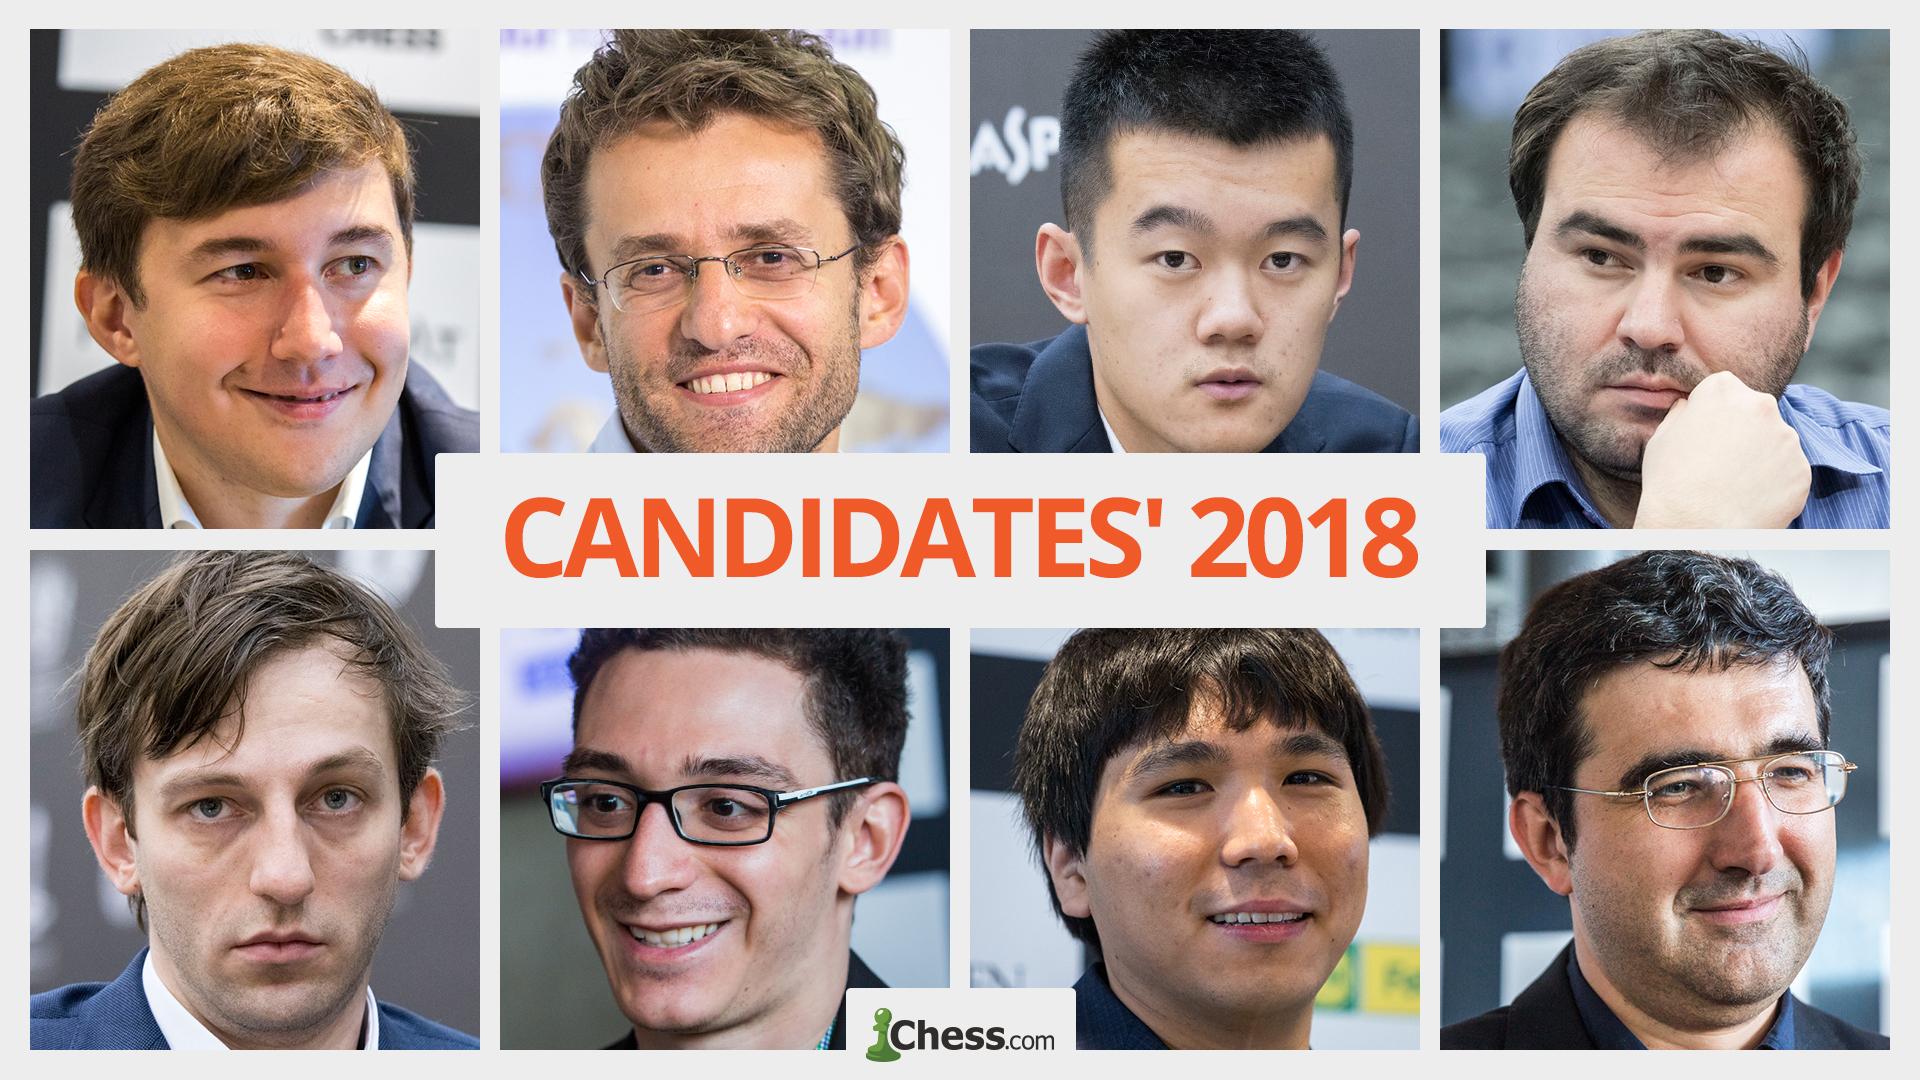 Giri, Carlsen Face Off On Twitter As FIDE Candidates' Tournament